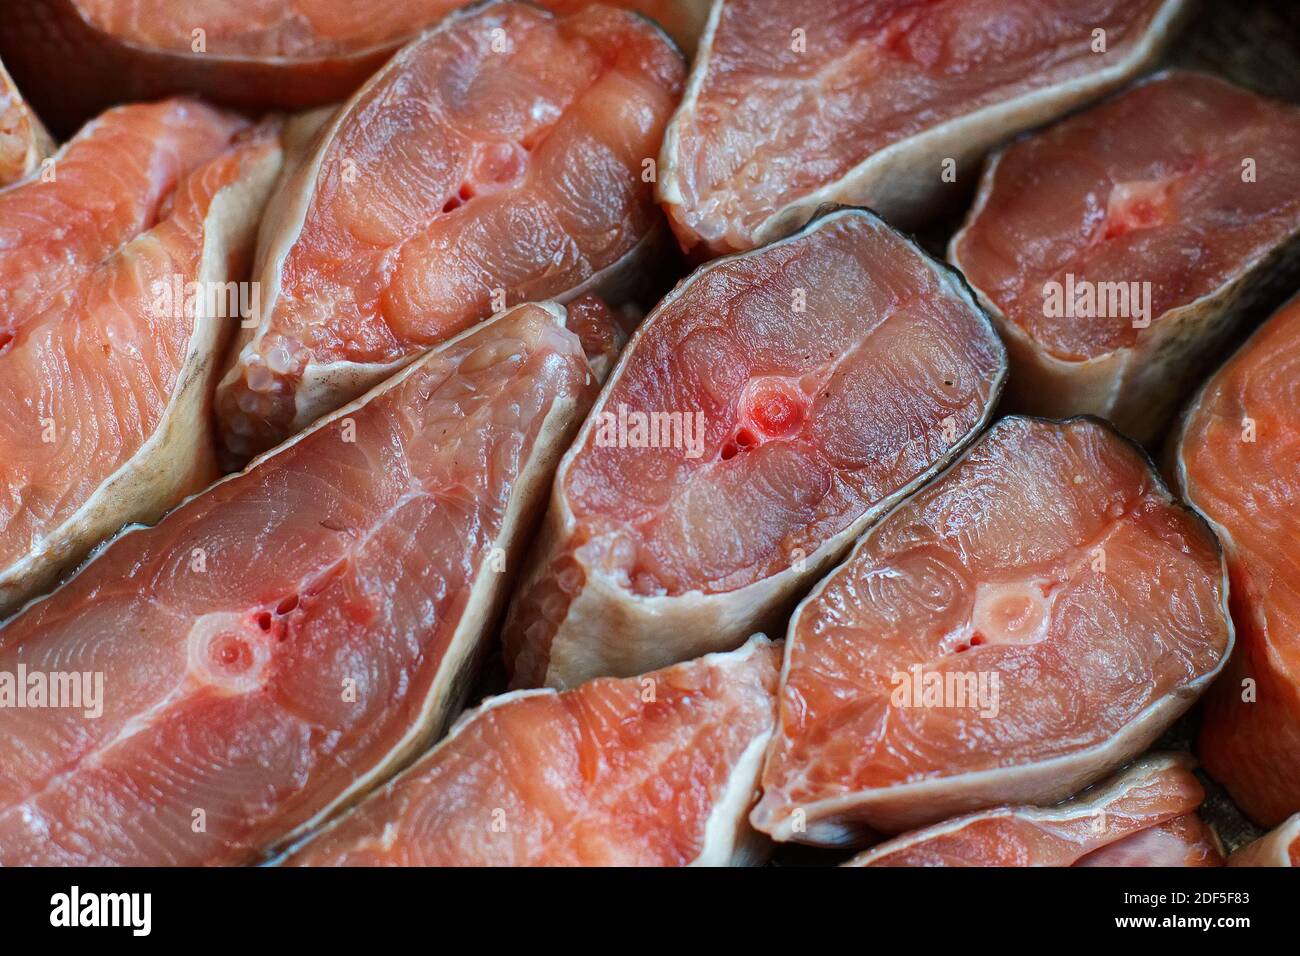 https://c8.alamy.com/comp/2DF5F83/sliced-pieces-of-red-fish-are-arranged-in-a-row-abstract-background-of-chum-salmon-or-pink-salmon-close-up-2DF5F83.jpg